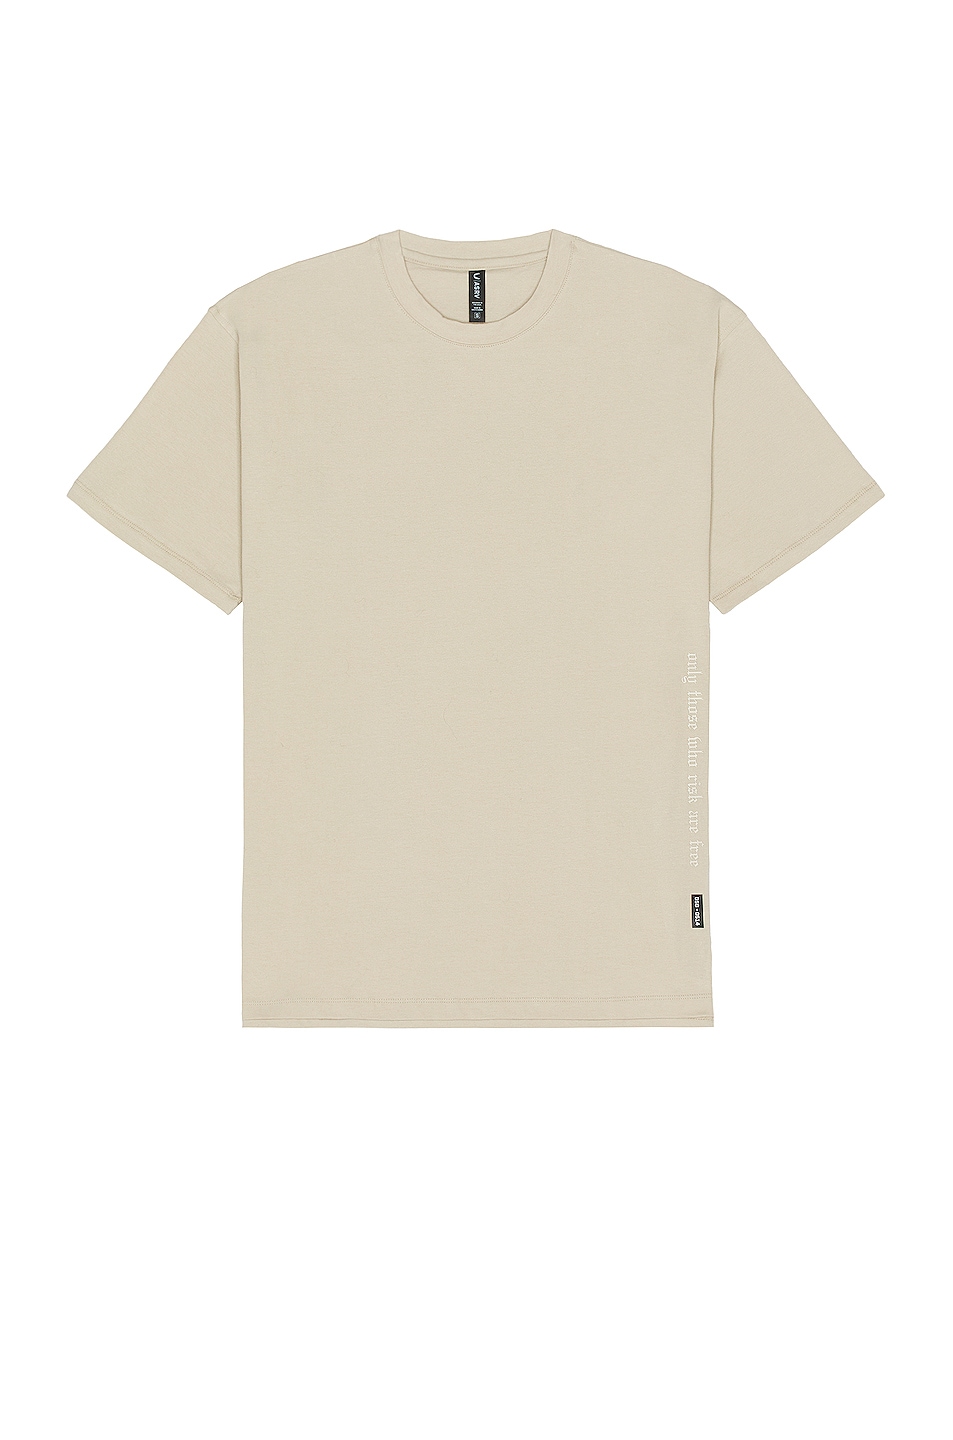 Cotton Plus Oversized Tee in Brown